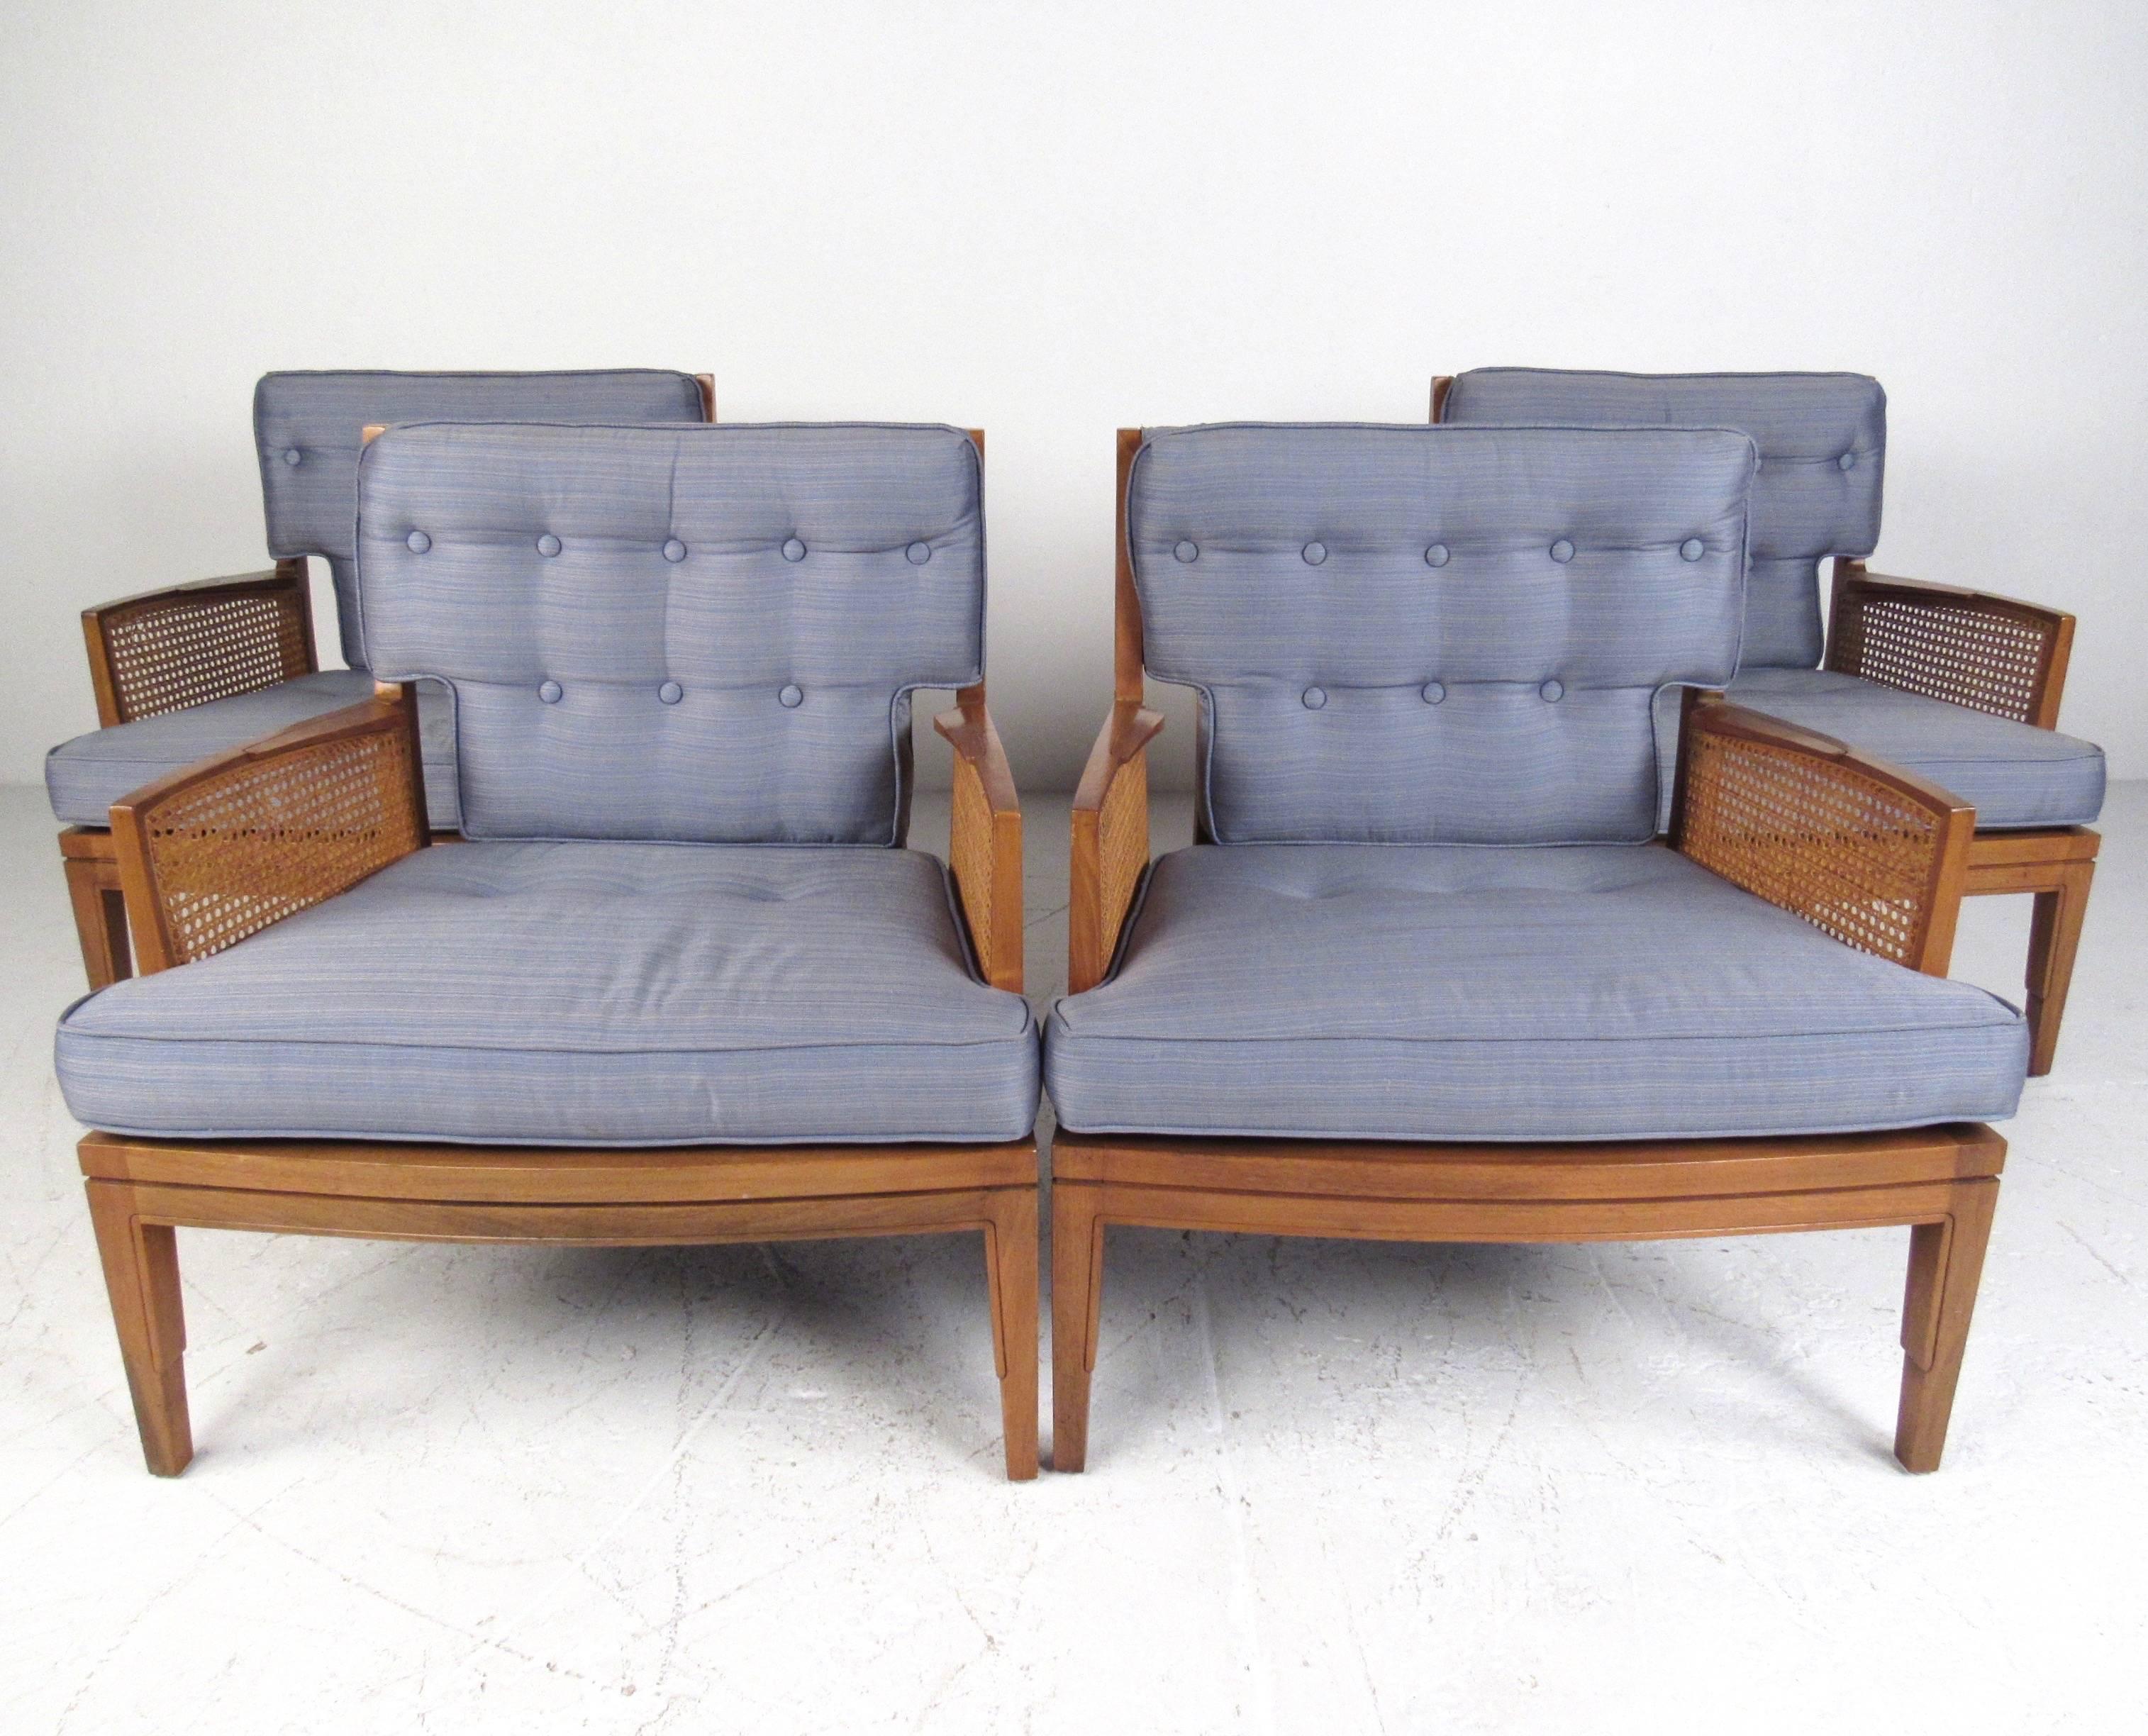 This beautiful set of four vintage chairs features tufted vintage upholstery, sculpted walnut frames, and unique caned armrests. Hard to find matching set of four armchairs make an excellent addition to any living room or waiting room. Wonderful mix